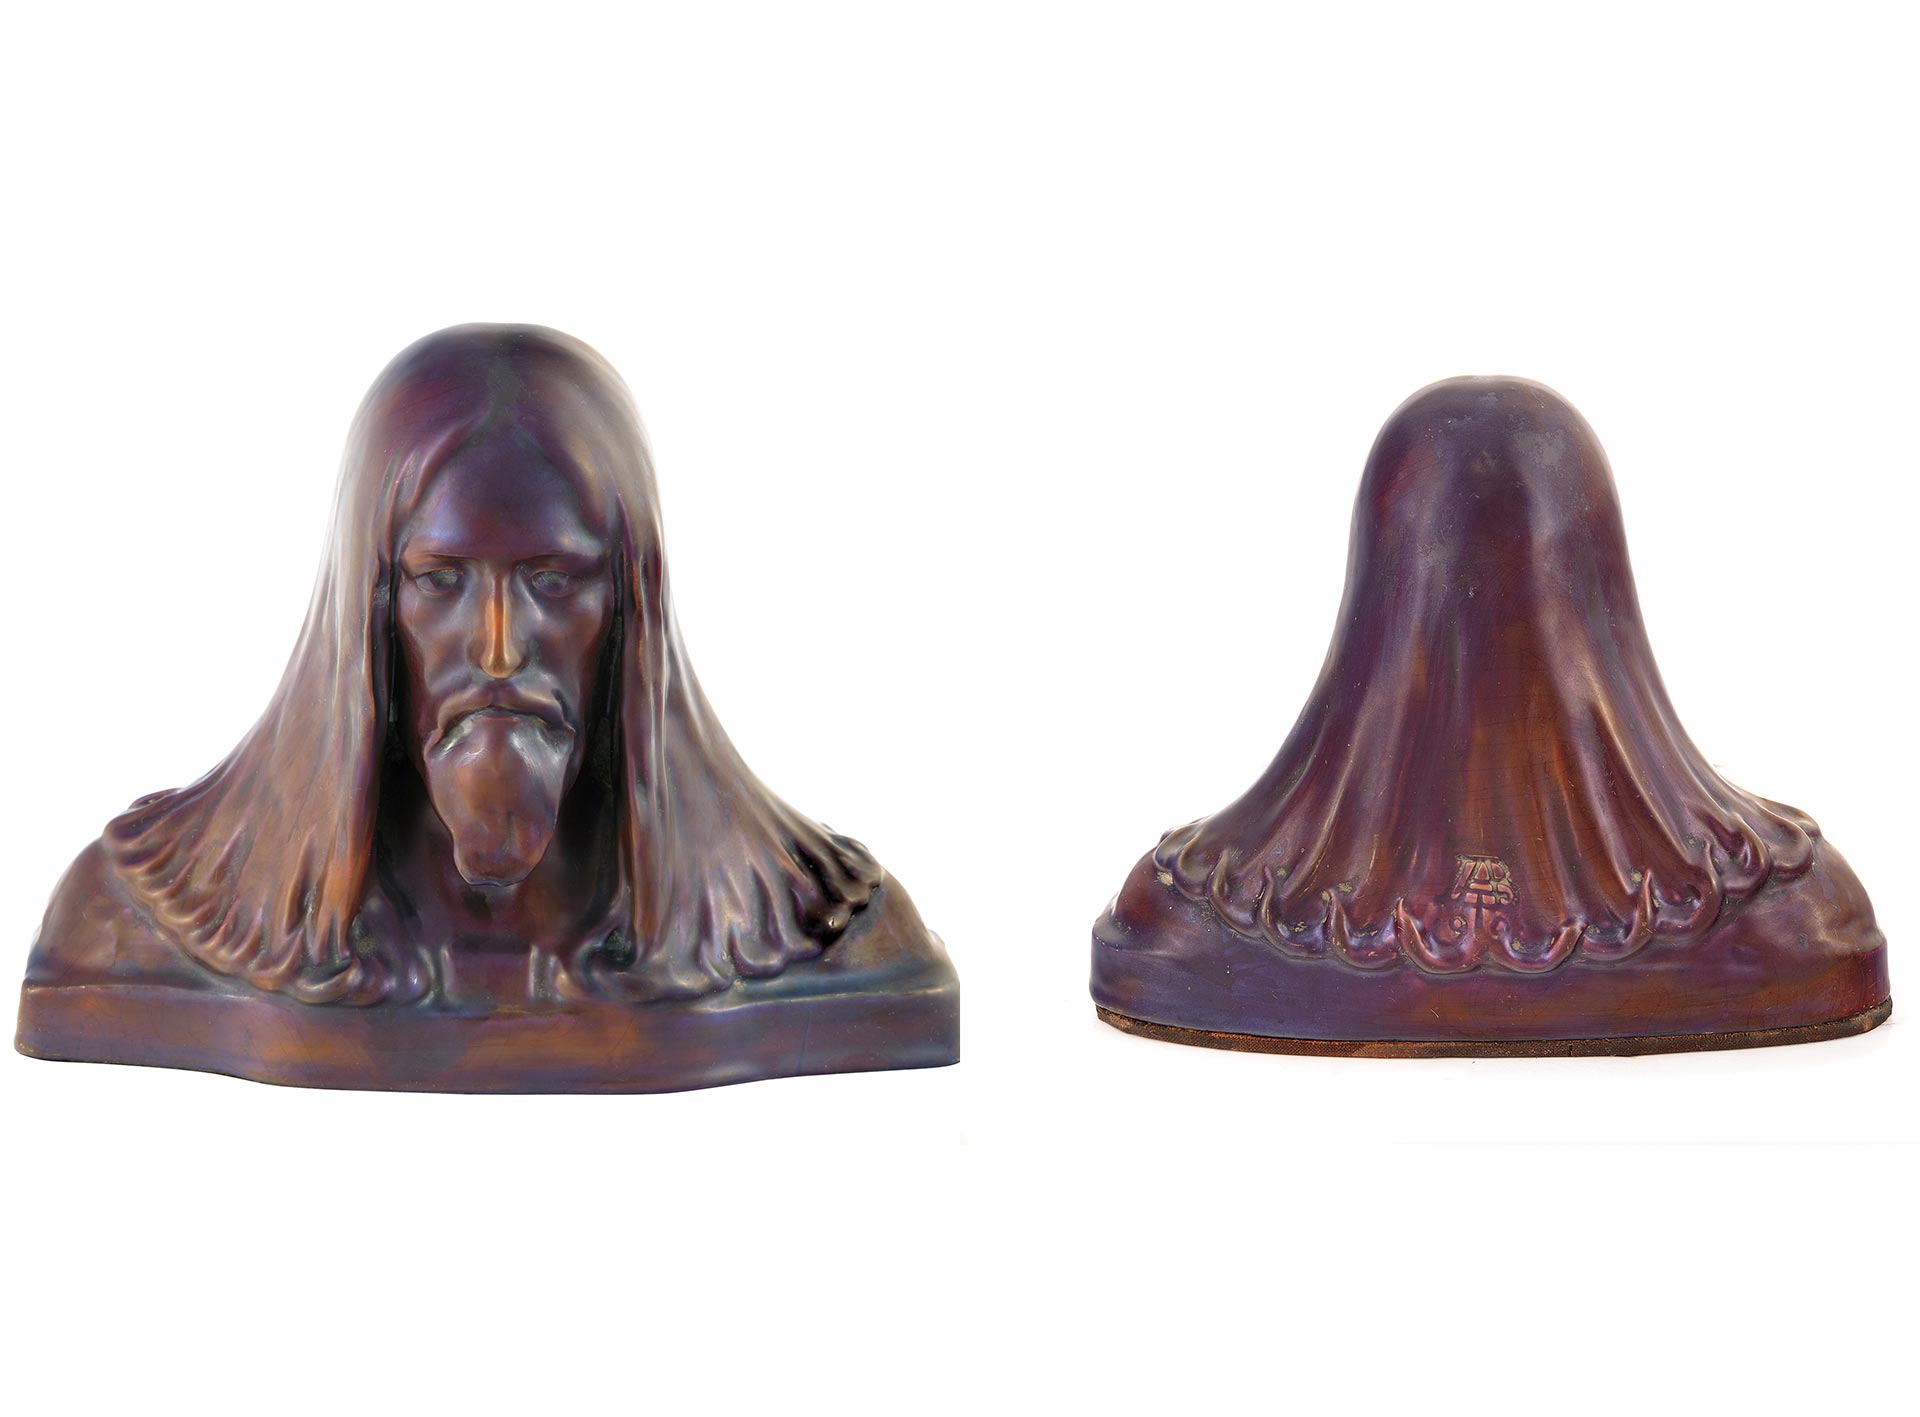 Zsolnay Statuette, Head of Christ, Zsolnay, 1899